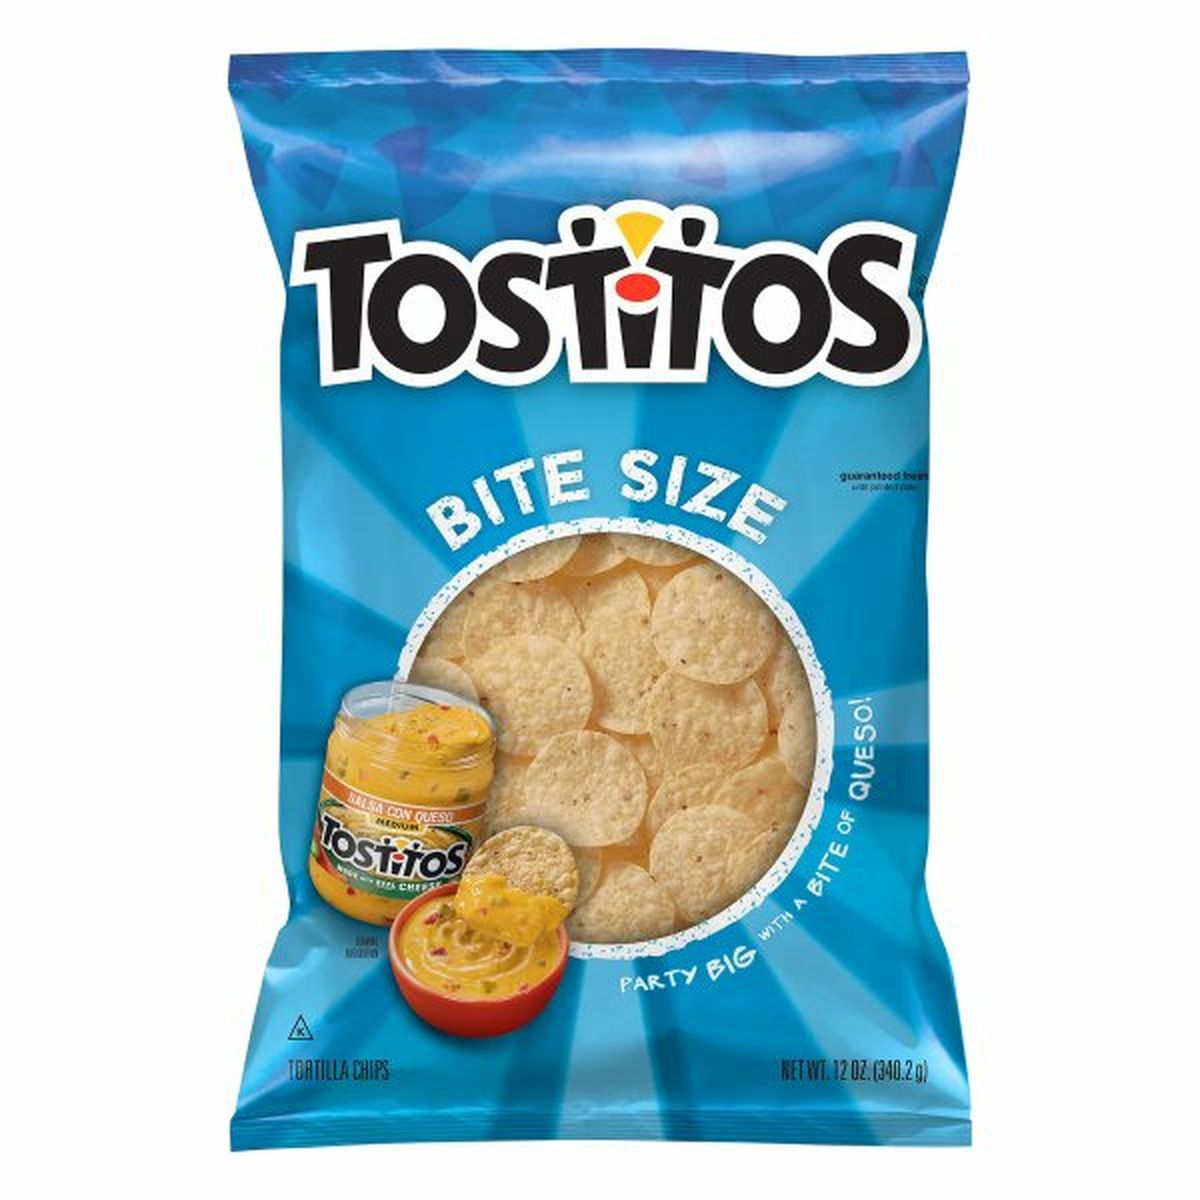 Calories in Tostitos Tortilla Chips, Bite Size